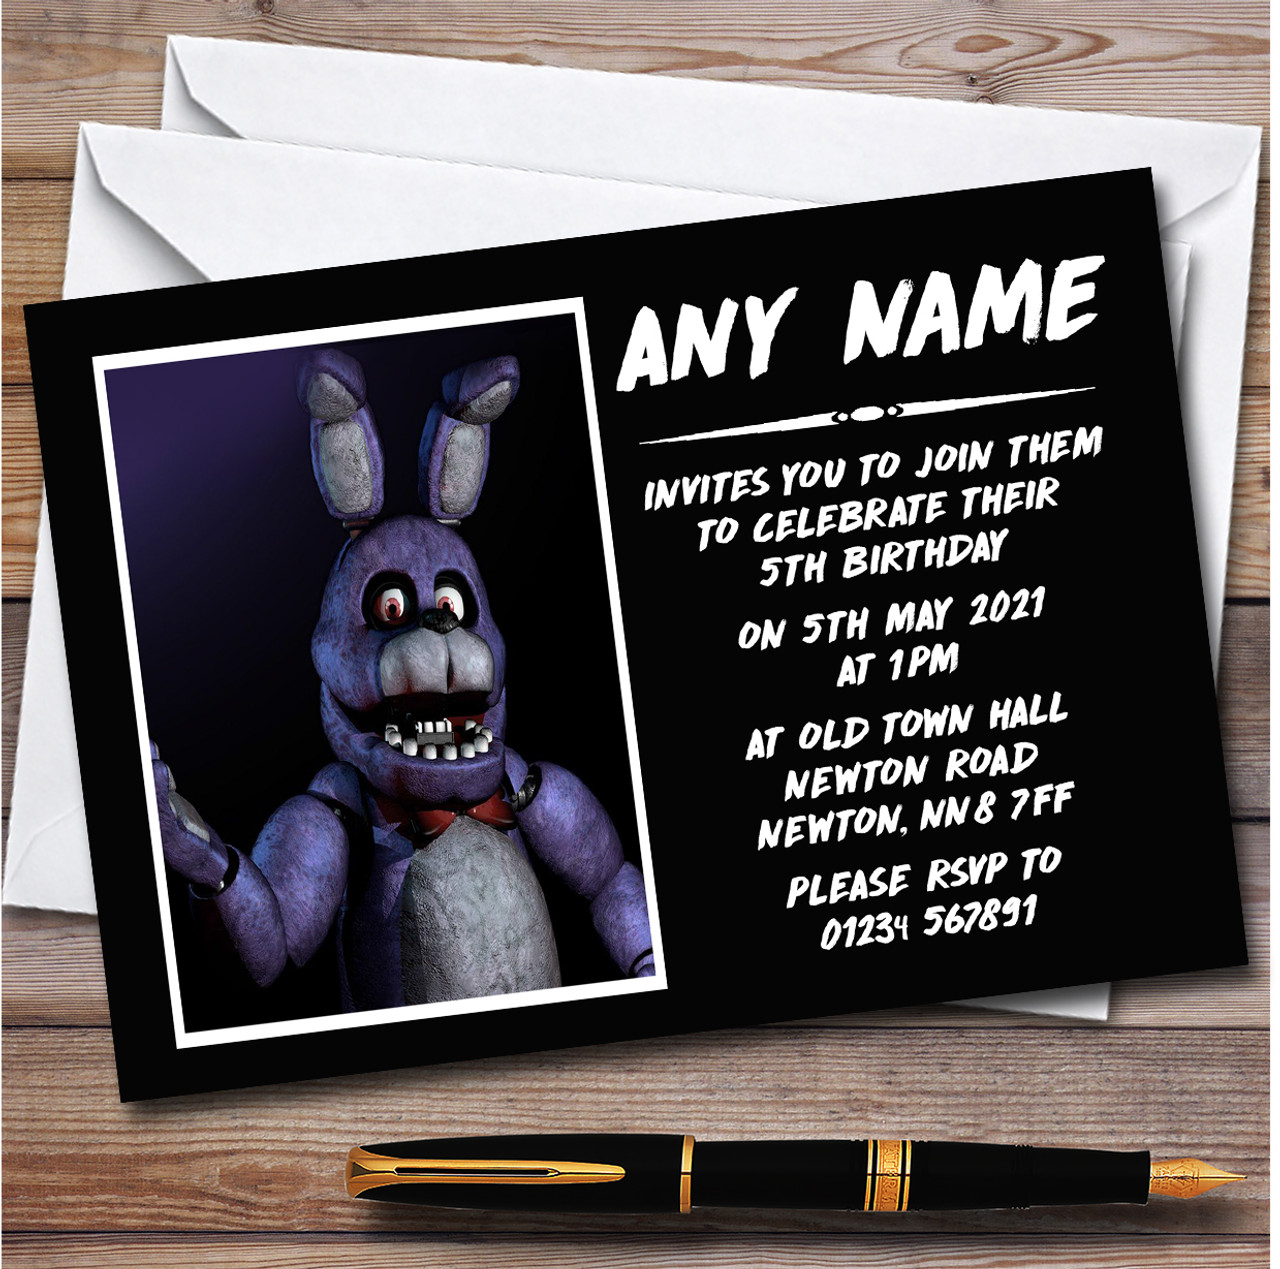 Personalized Fnaf Five Nights At Freddy's Bonnie Children's Birthday Card -  Red Heart Print